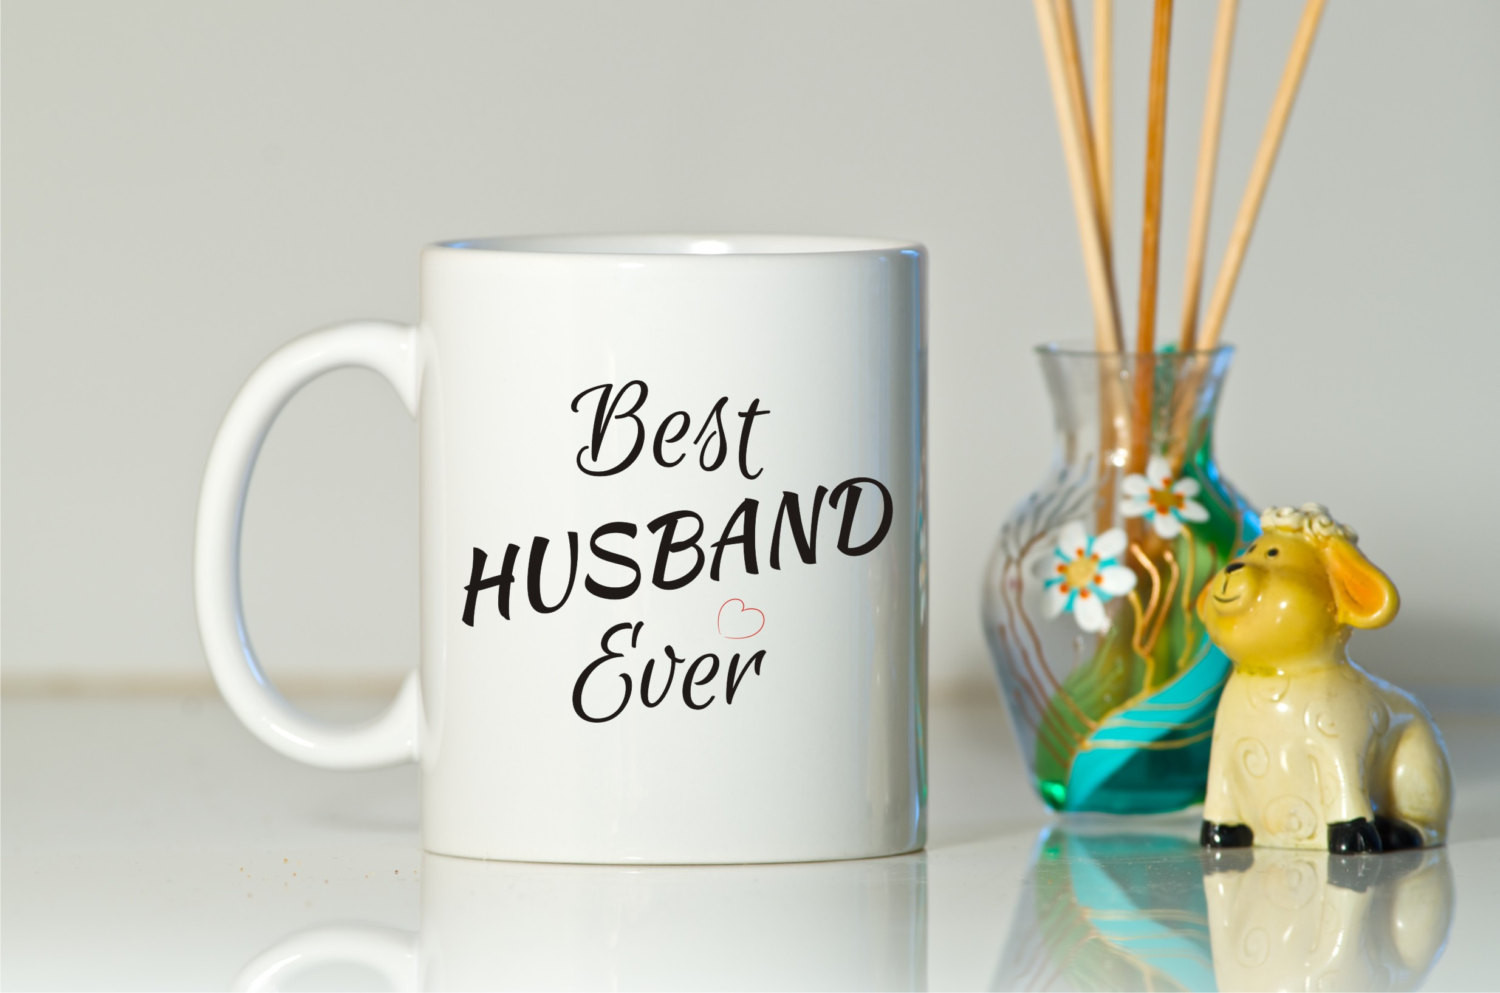 Birthday Gifts For Husband
 First Birthday Gift for Husband Wife After Wedding